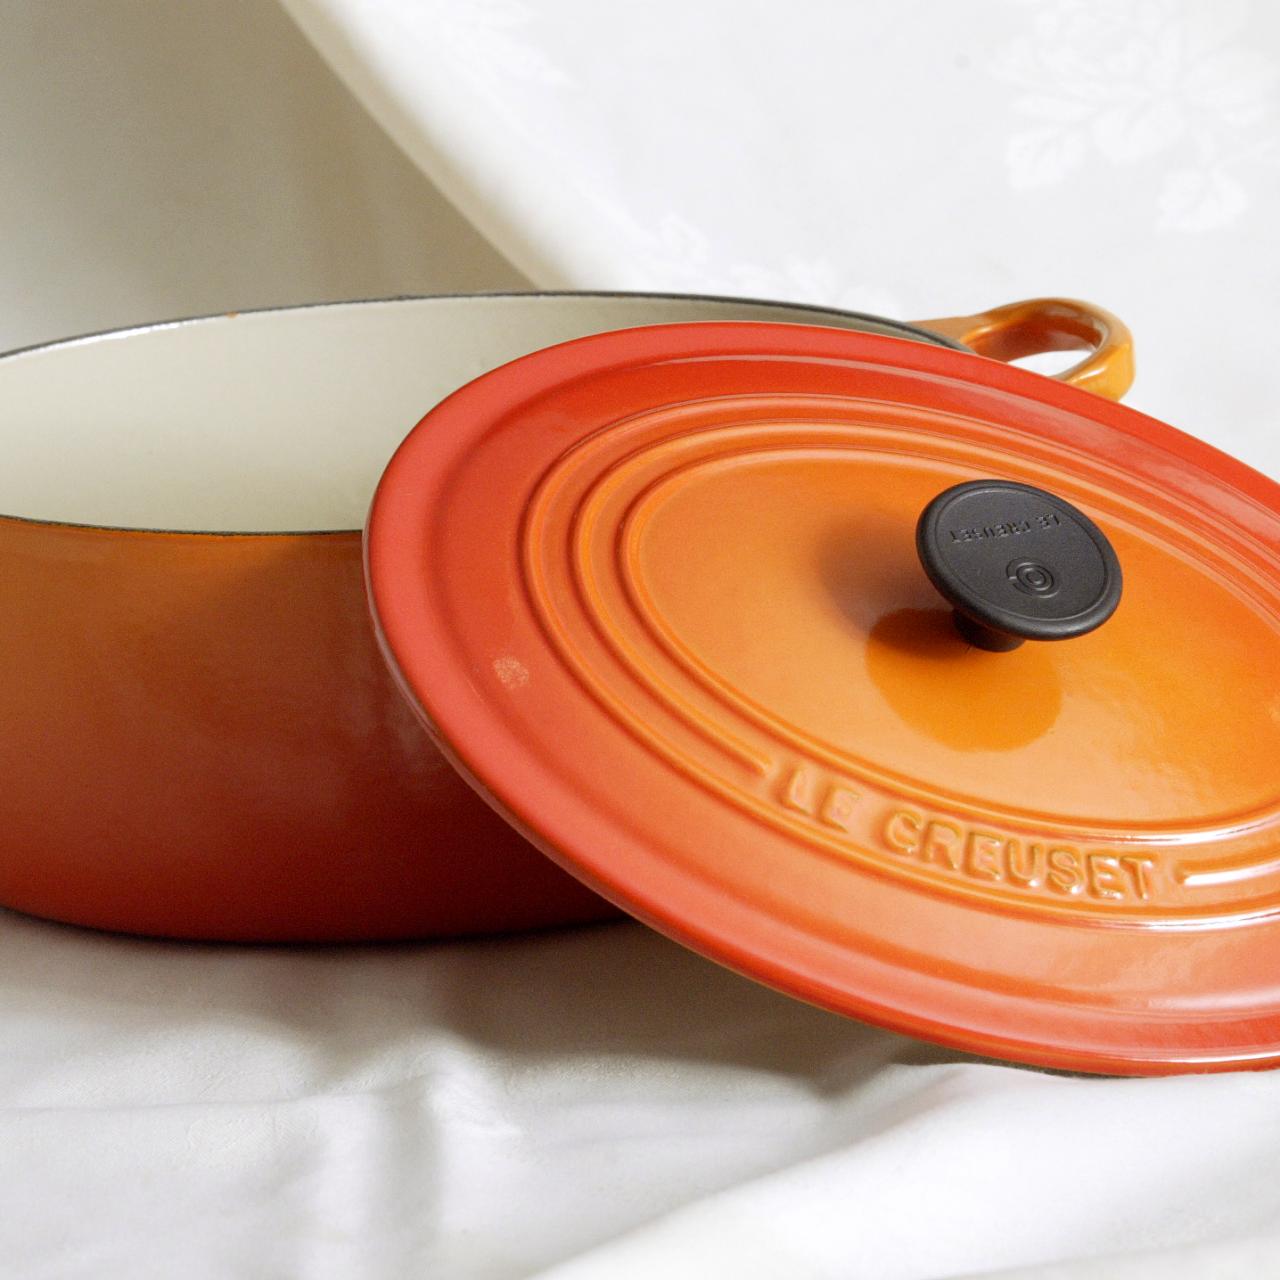 Le Creuset's Festive Noël Collection is 20% Off Right Now